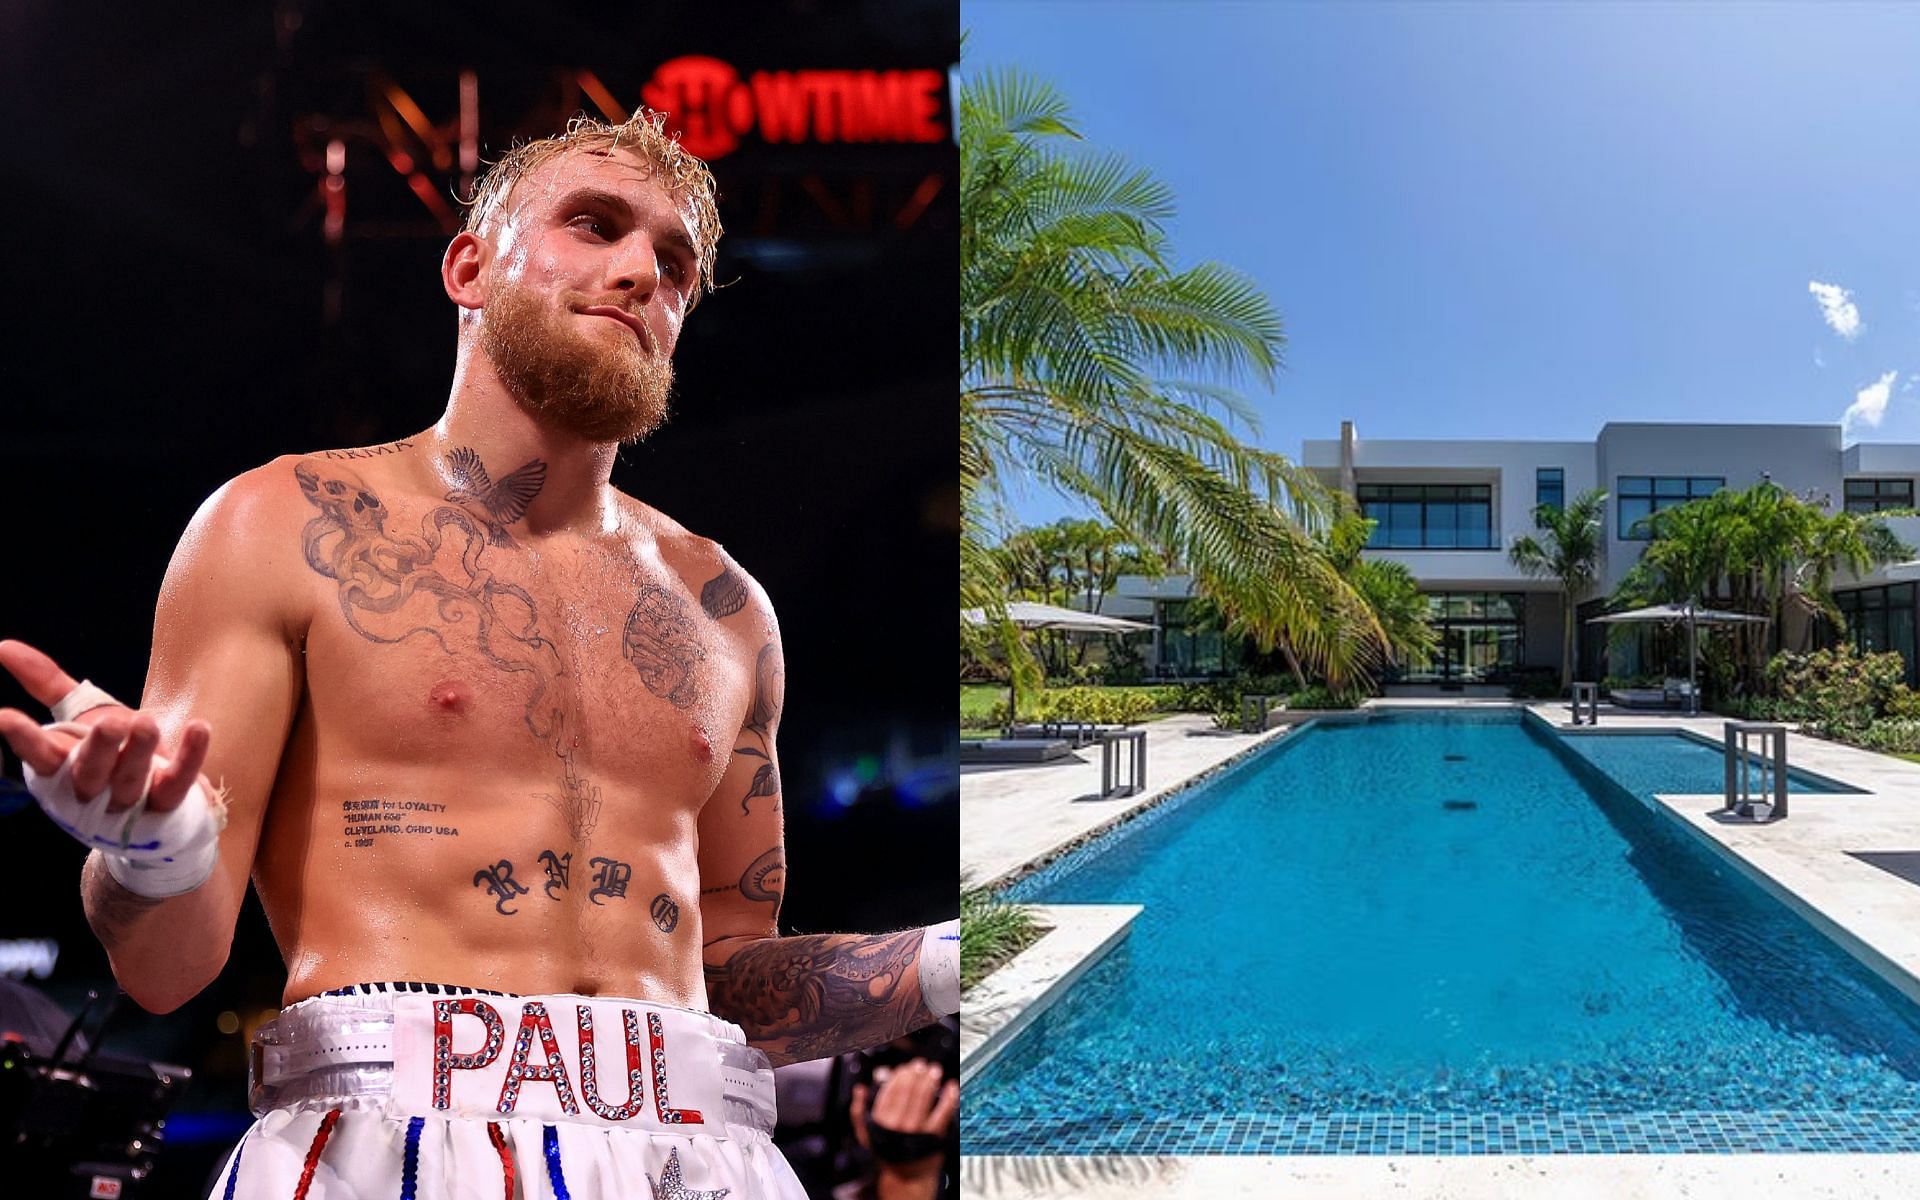 Jake Paul (left) and reported photos of his new mansion (right) [Image credits: Getty Images and TMZ official website] 